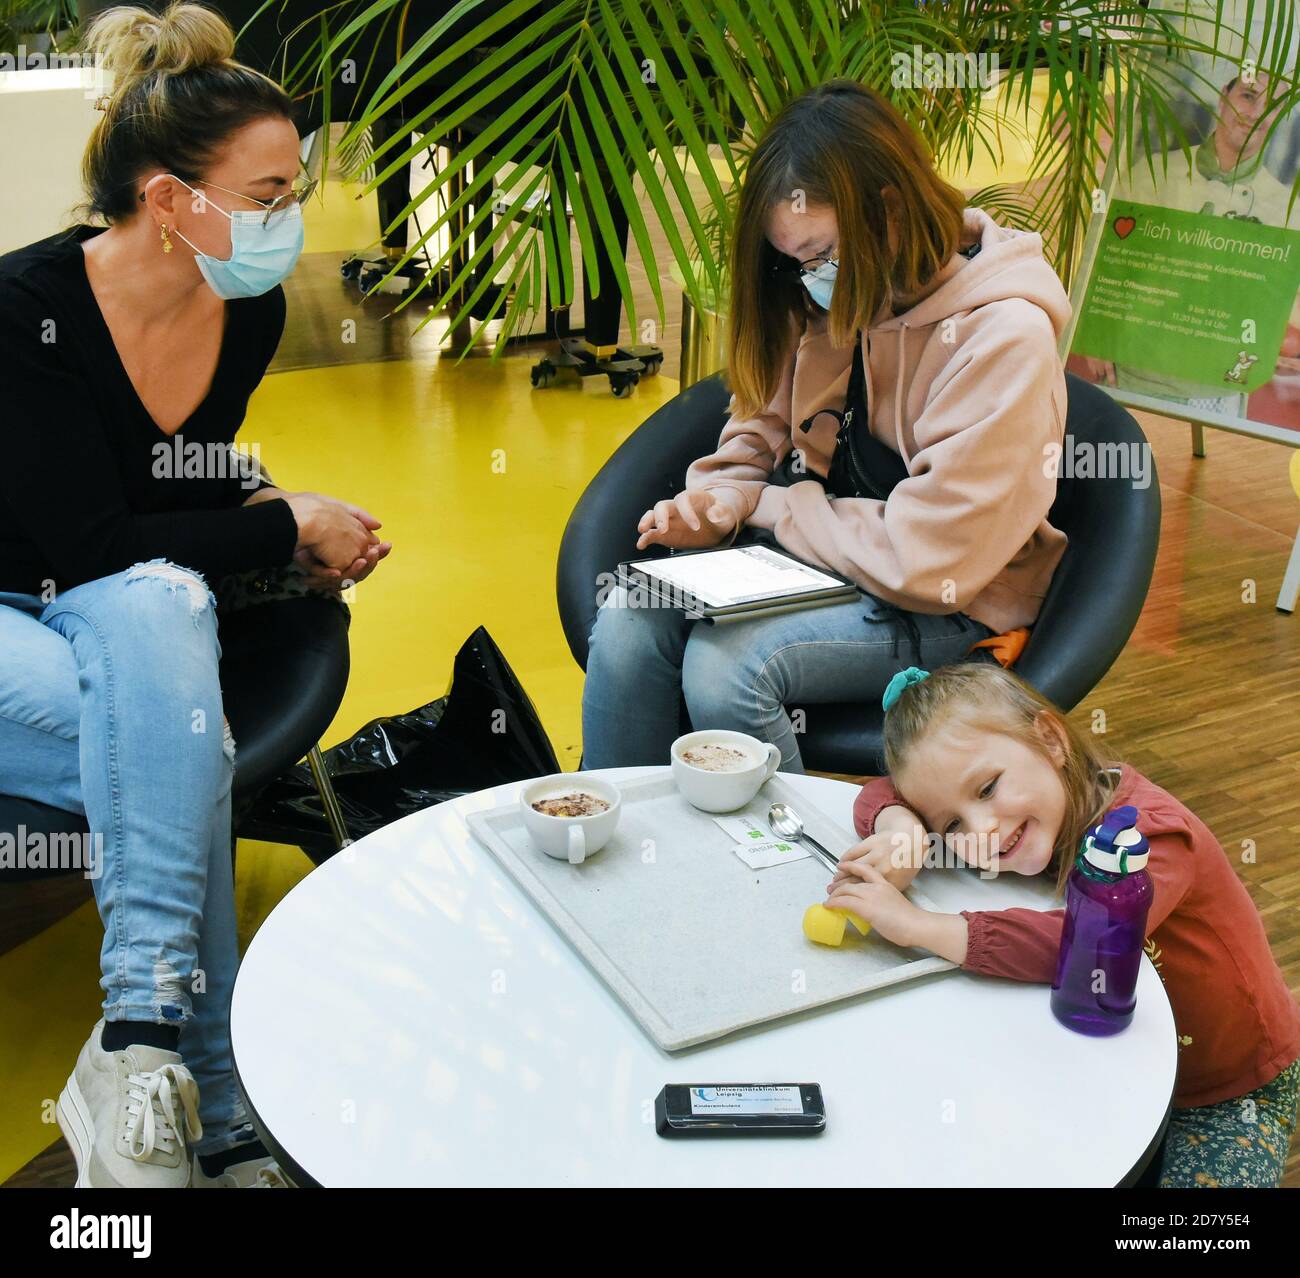 23 October 2020, Saxony-Anhalt, Köthen: A mother sits with her two children in the children's hospital of the University Hospital relaxed at a table in the cafeteria, on which a pager (pager receiver, in the foreground) is located, which signals the call to the consulting room with a buzzing sound. In the current time with increasing corona numbers, the new paging system, with which patients can move up to 500 meters away, is intended to equalize the situation in the waiting areas. The pagers should make it possible to maintain the distances even in the case of a large crowd. The paging receiv Stock Photo